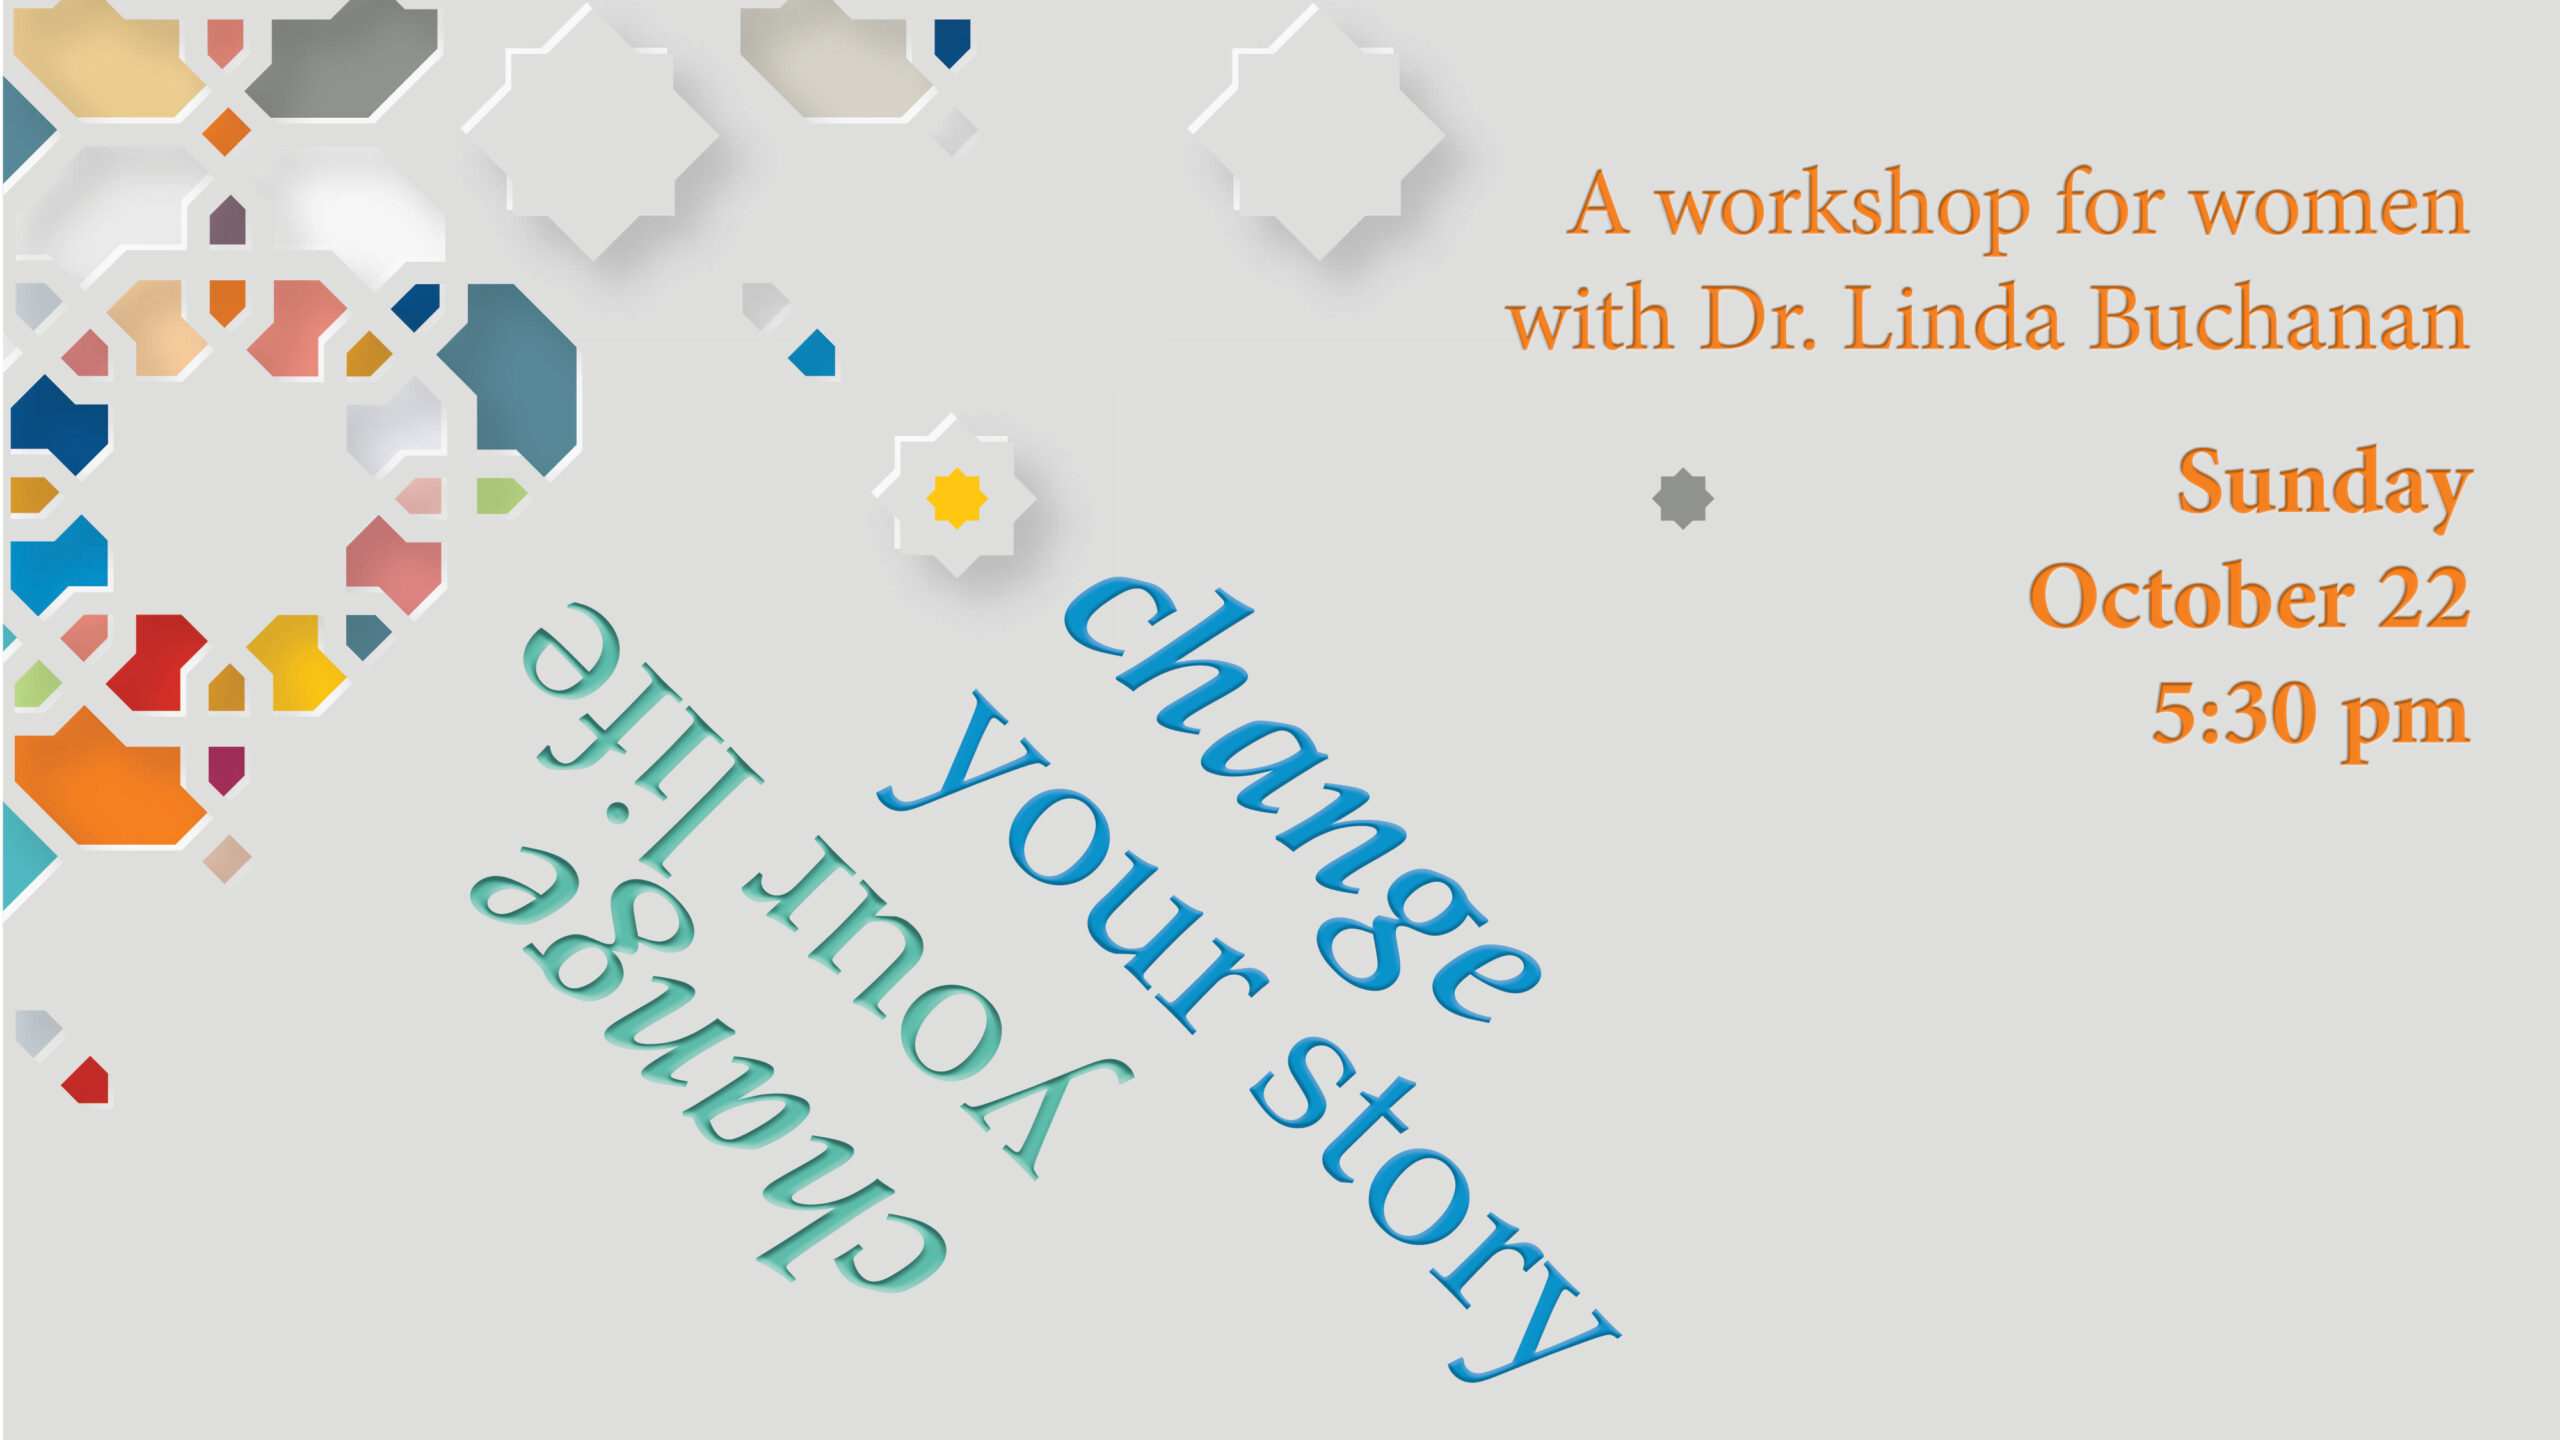 Change your story, change your life. A workshop for women with Dr. Linda Buchanan at Peachtree Road UMC in Atlanta.